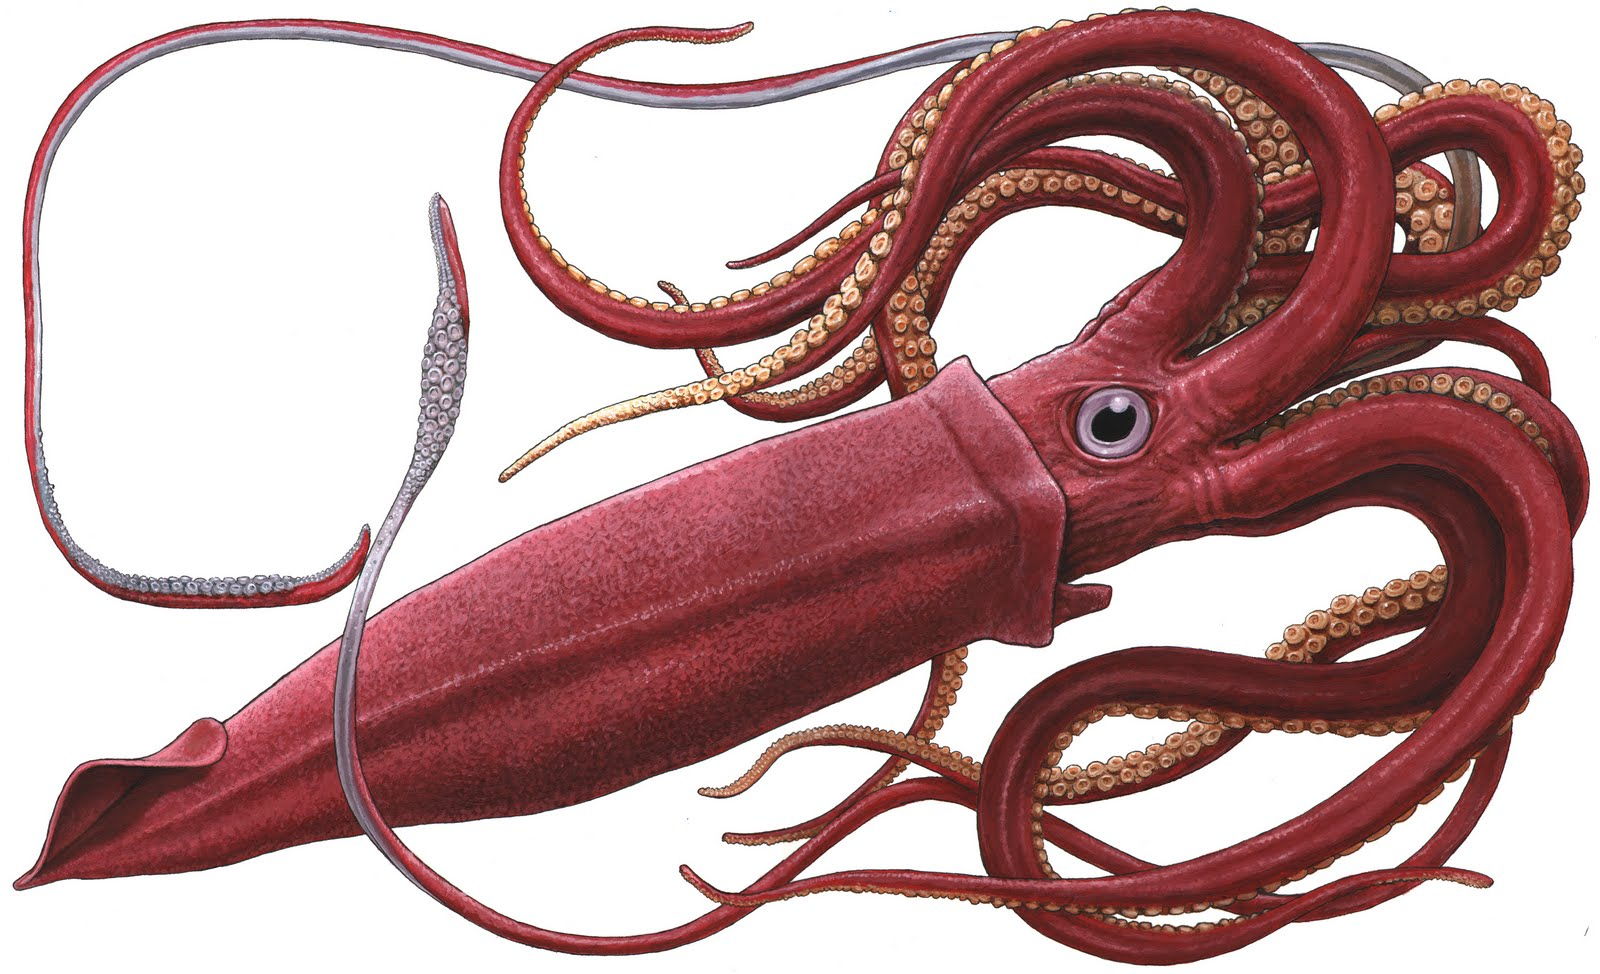 This squid has the largest animal eyes